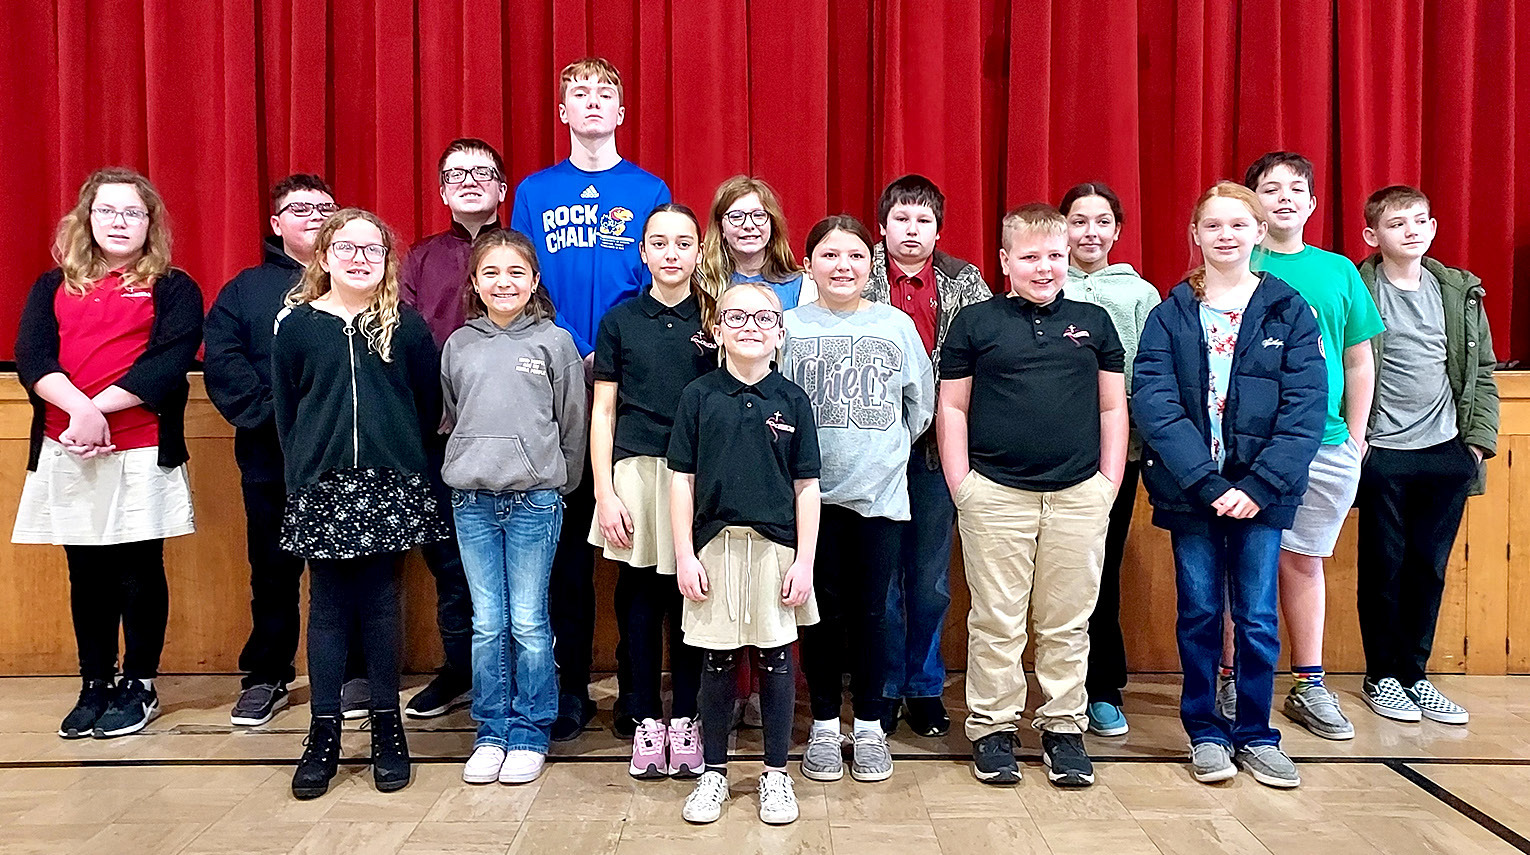 THE TOP SPELLERS representing their schools at the Rooks County Spelling Bee held at Sacred Heart on Friday, February 9th are (front row, from left) Ash Dinkel; (middle row) Kaylee Clayton, Bryah Stithem, Kaylyn Becker, Haddie Carpenter, Max Brewster, Daylan Beesley; (back row) Ava Ryan, Liam Balthazor, Channing Oehm, Cayden Klein, Lyla Oller, Barrett Moore, Hannah Gosselin, Kayne Karlin, and Veidyn Holmes.